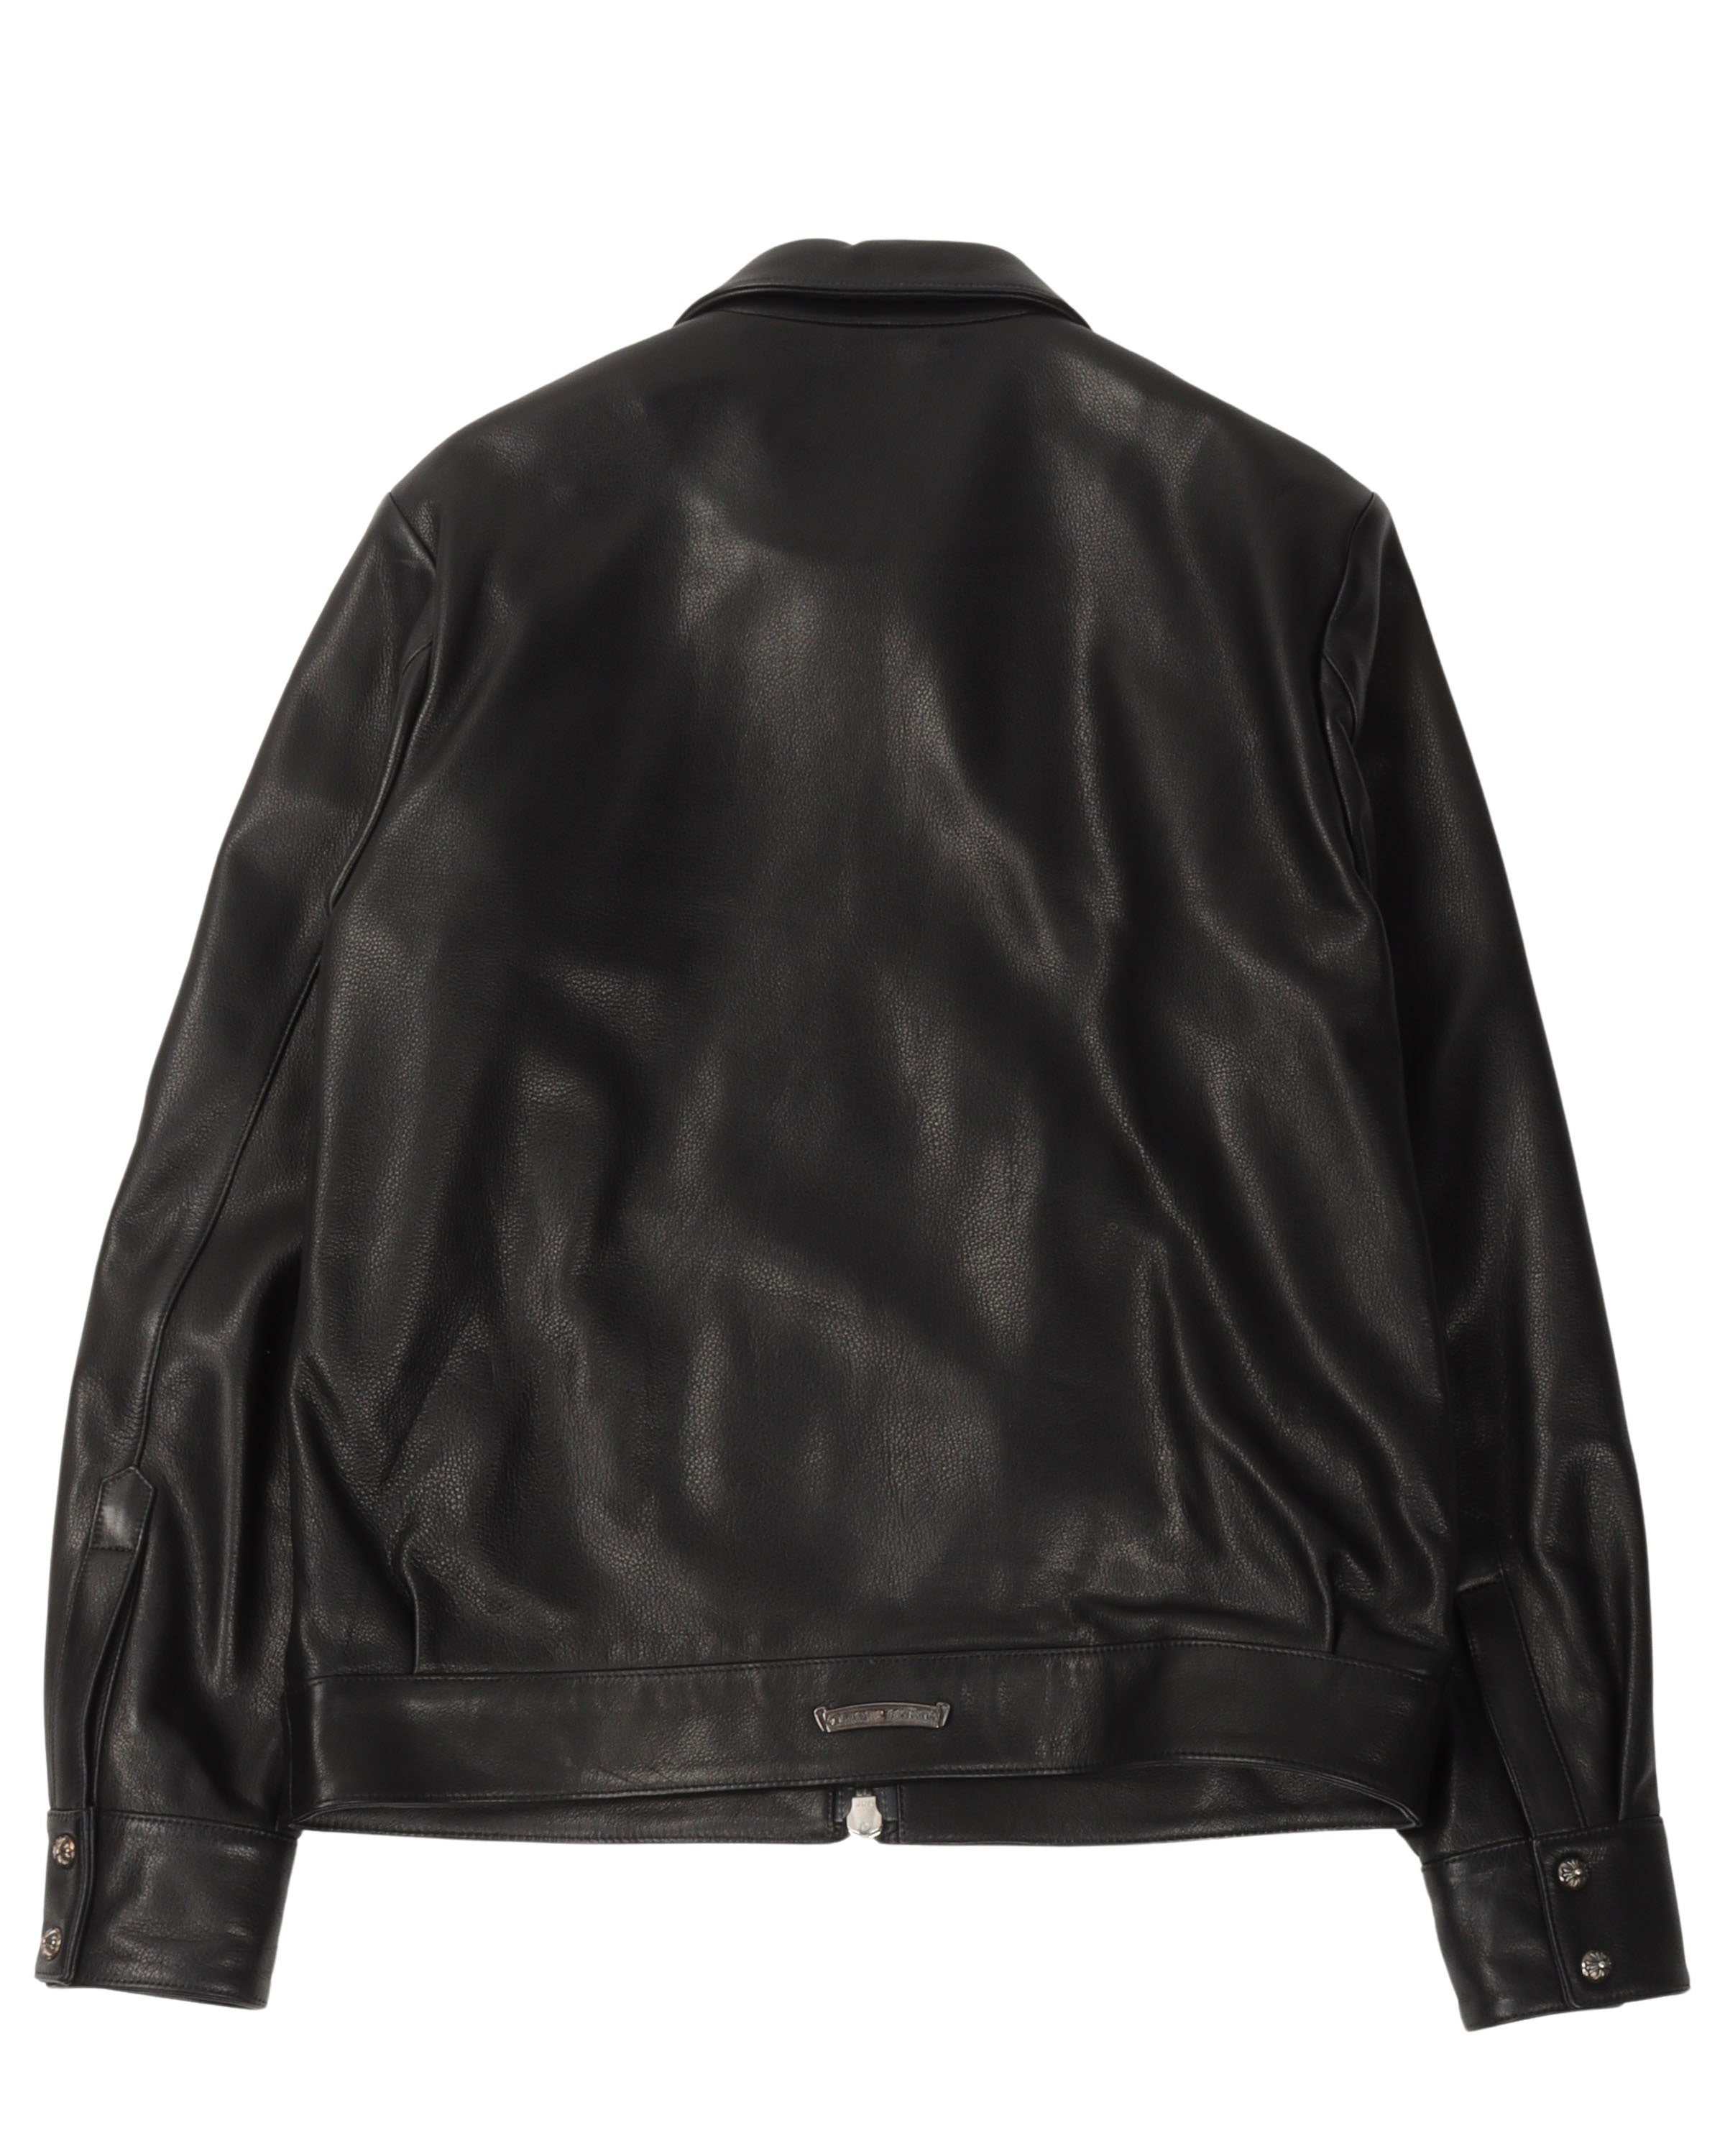 Cemetery Cross Patch Zip Up Leather Jacket